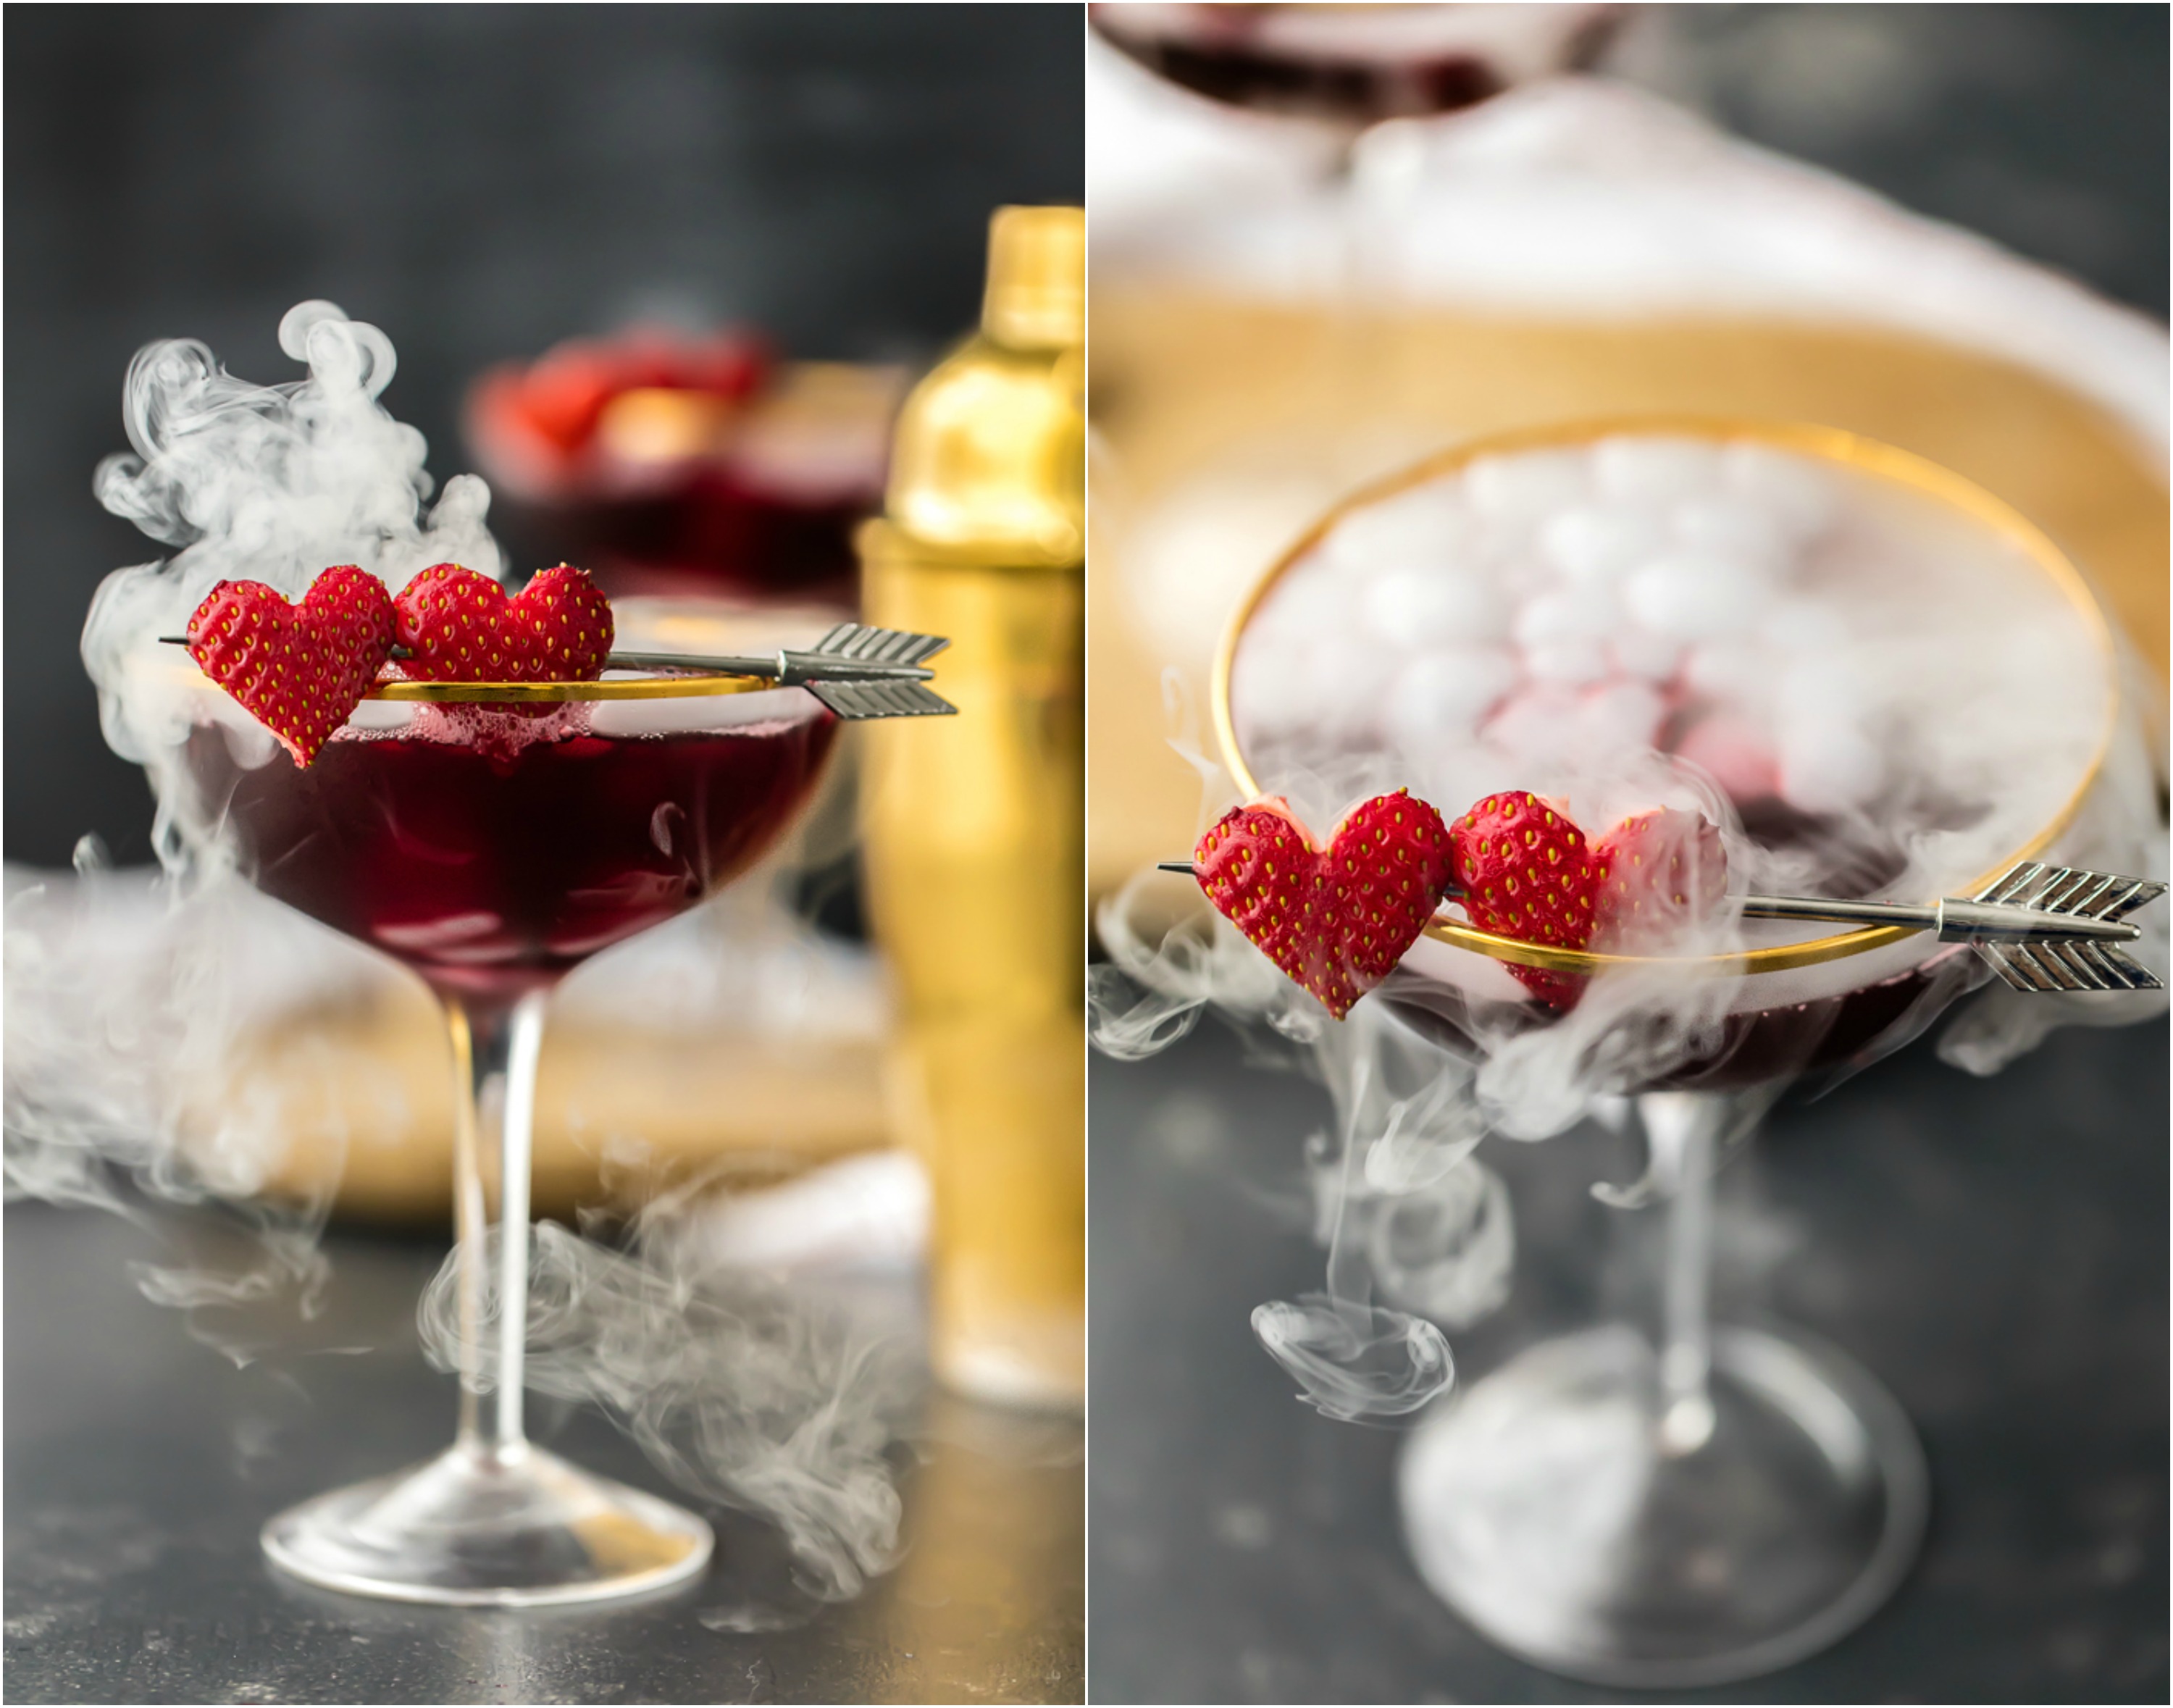 You need LOVE POTION #9 MARTINI for Valentine's Day! This is the cutest Valentine's Day Cocktail! Triple Berry Martini tastes great, is beautiful, and EASY! Made with dry ice, this is such a fun and festive Valentines Day pink drink!